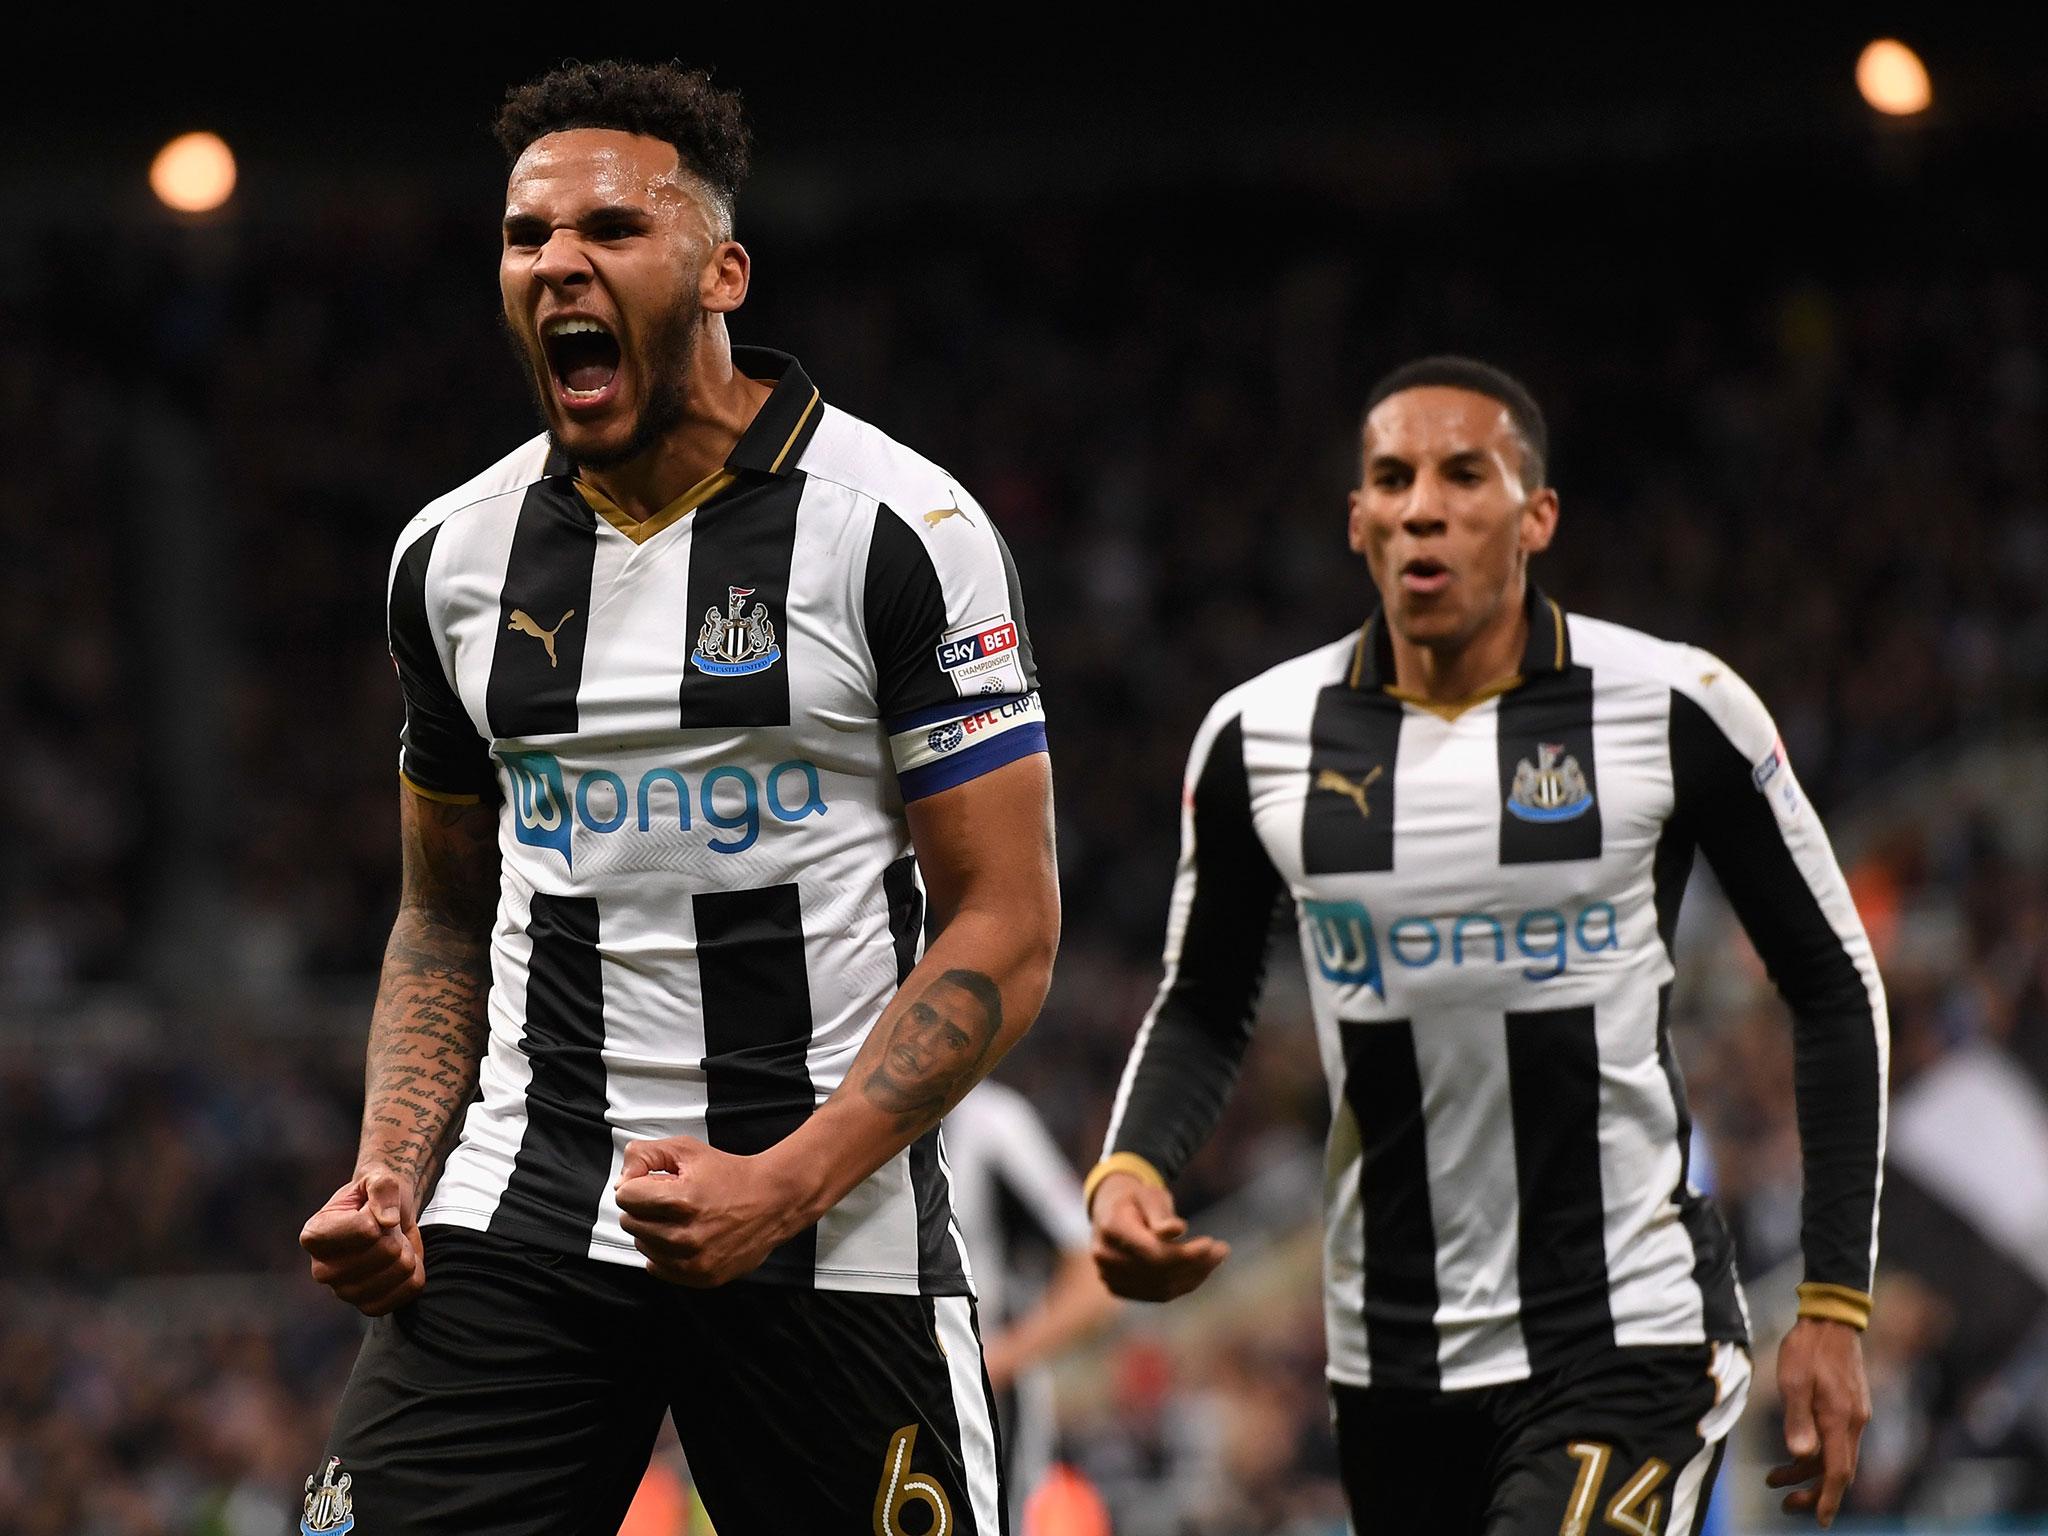 Lascelles is understood to have impressed club scouts this season